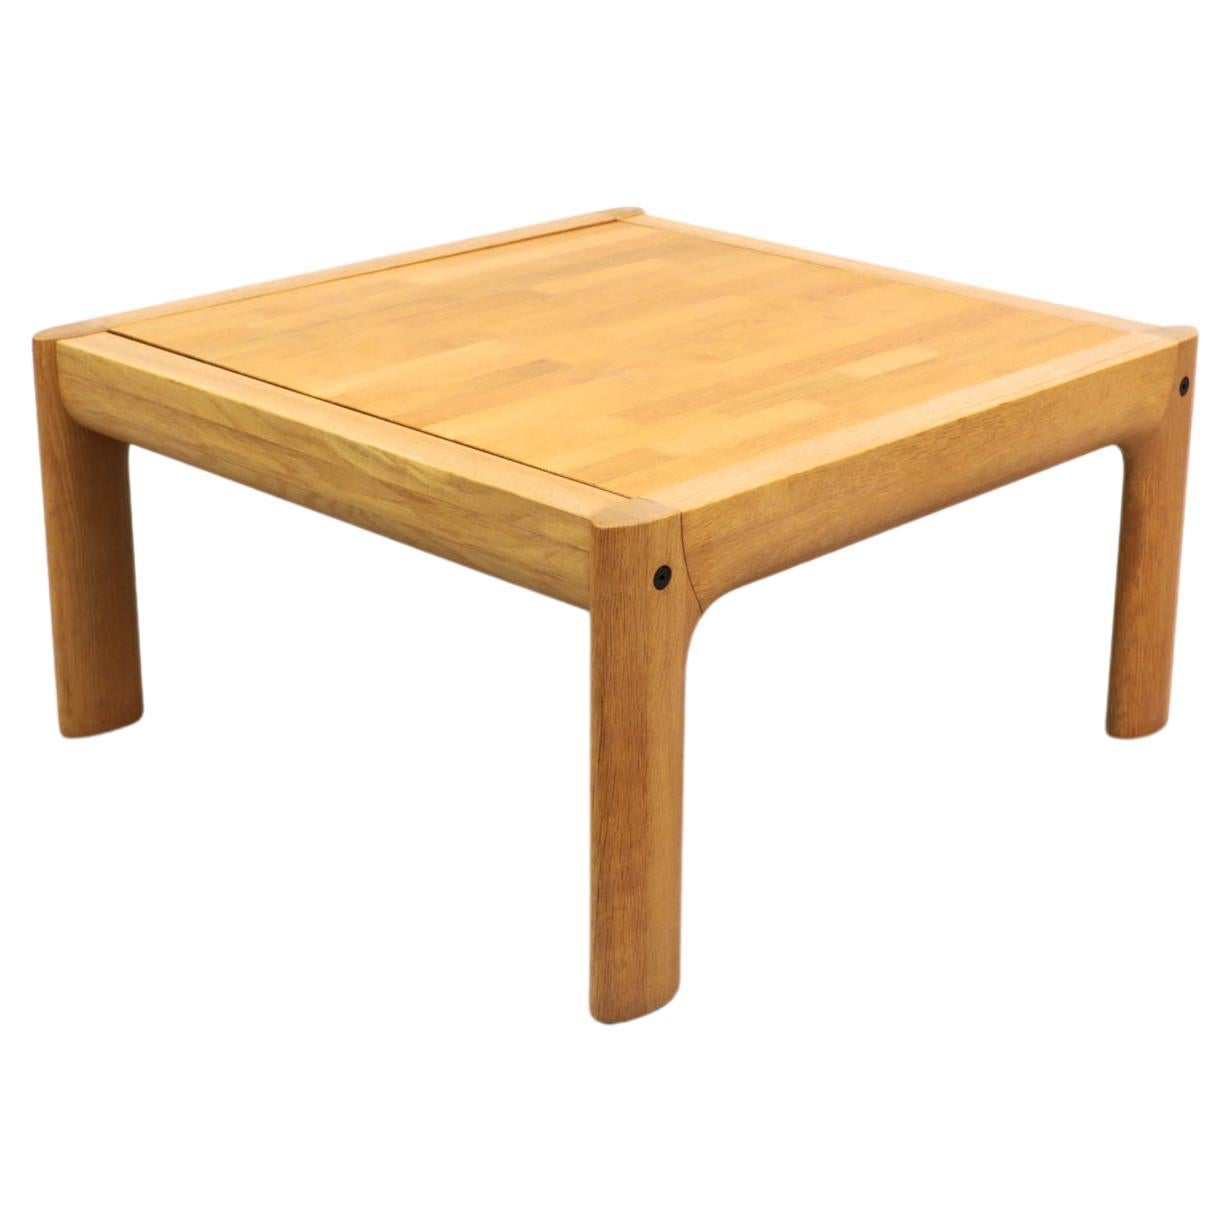 Asko Oak Coffee Table with Inset Top